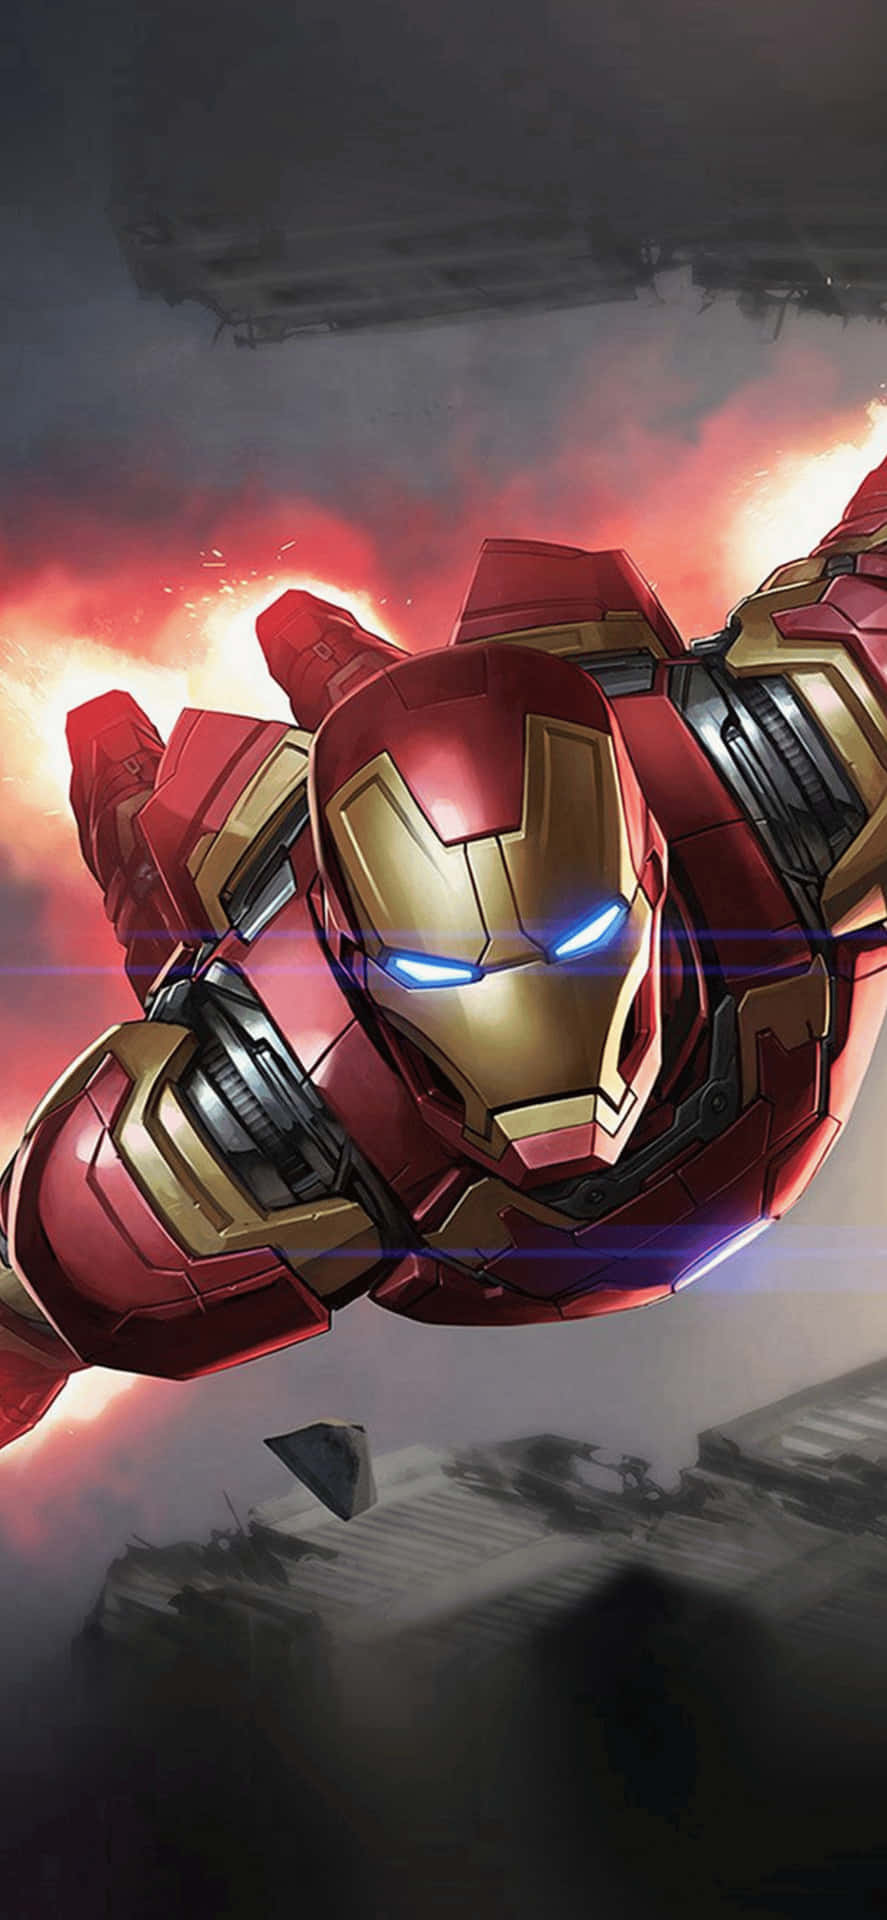 "Epic Display of Marvel Heroes on iPhone XS Max Screen"